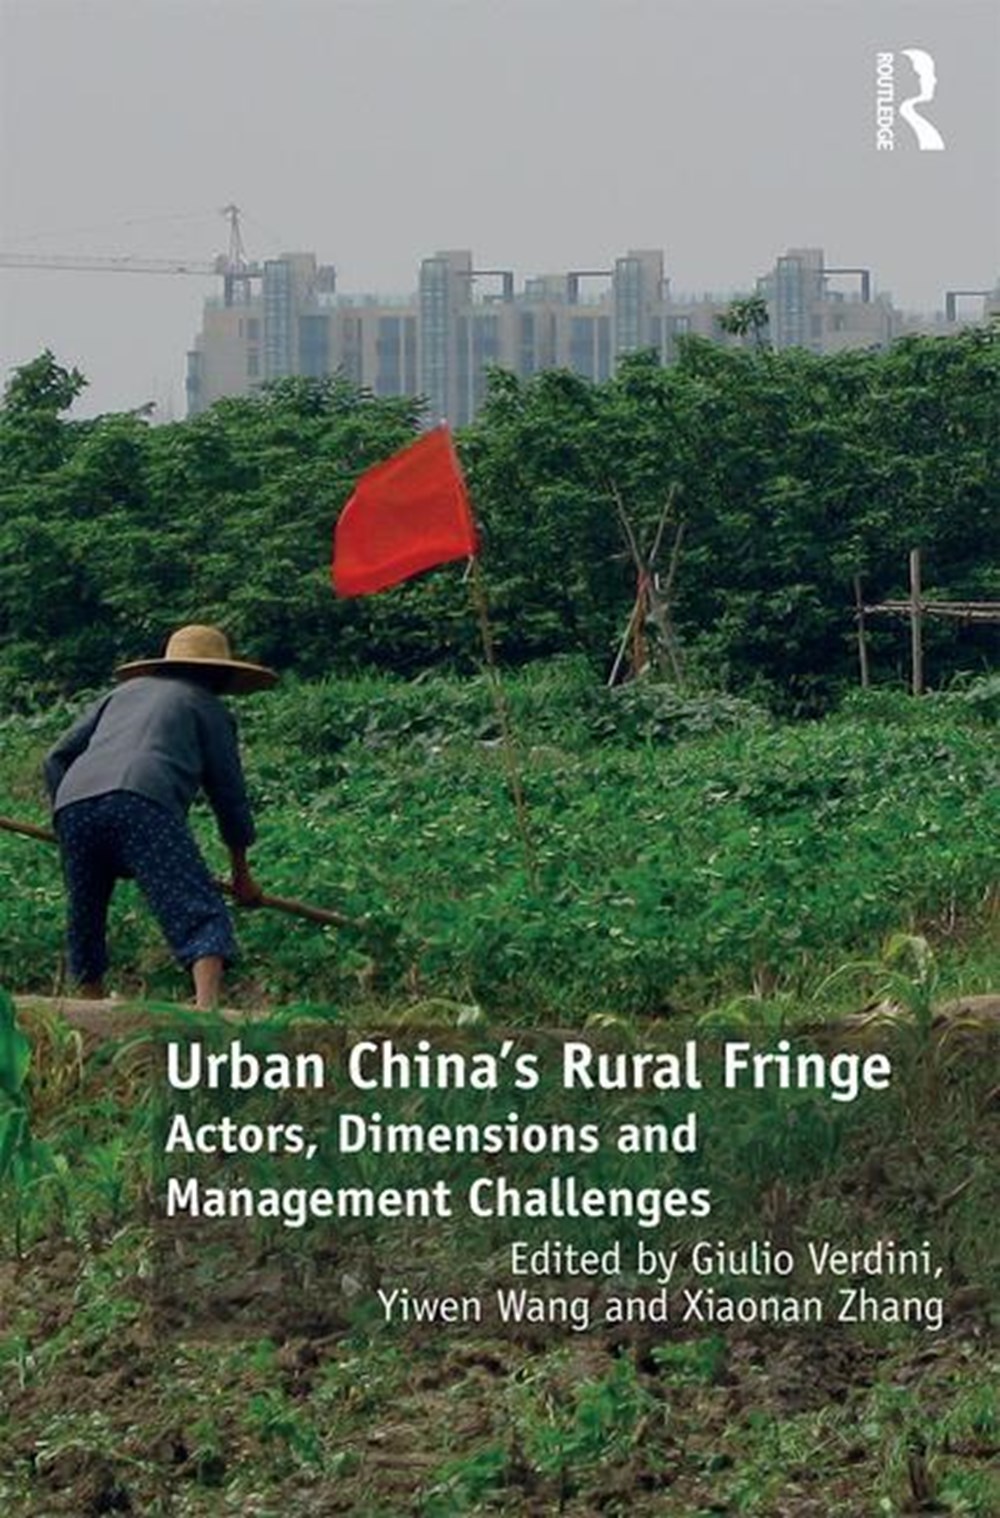 Urban China's Rural Fringe: Actors, Dimensions and Management Challenges (Revised)